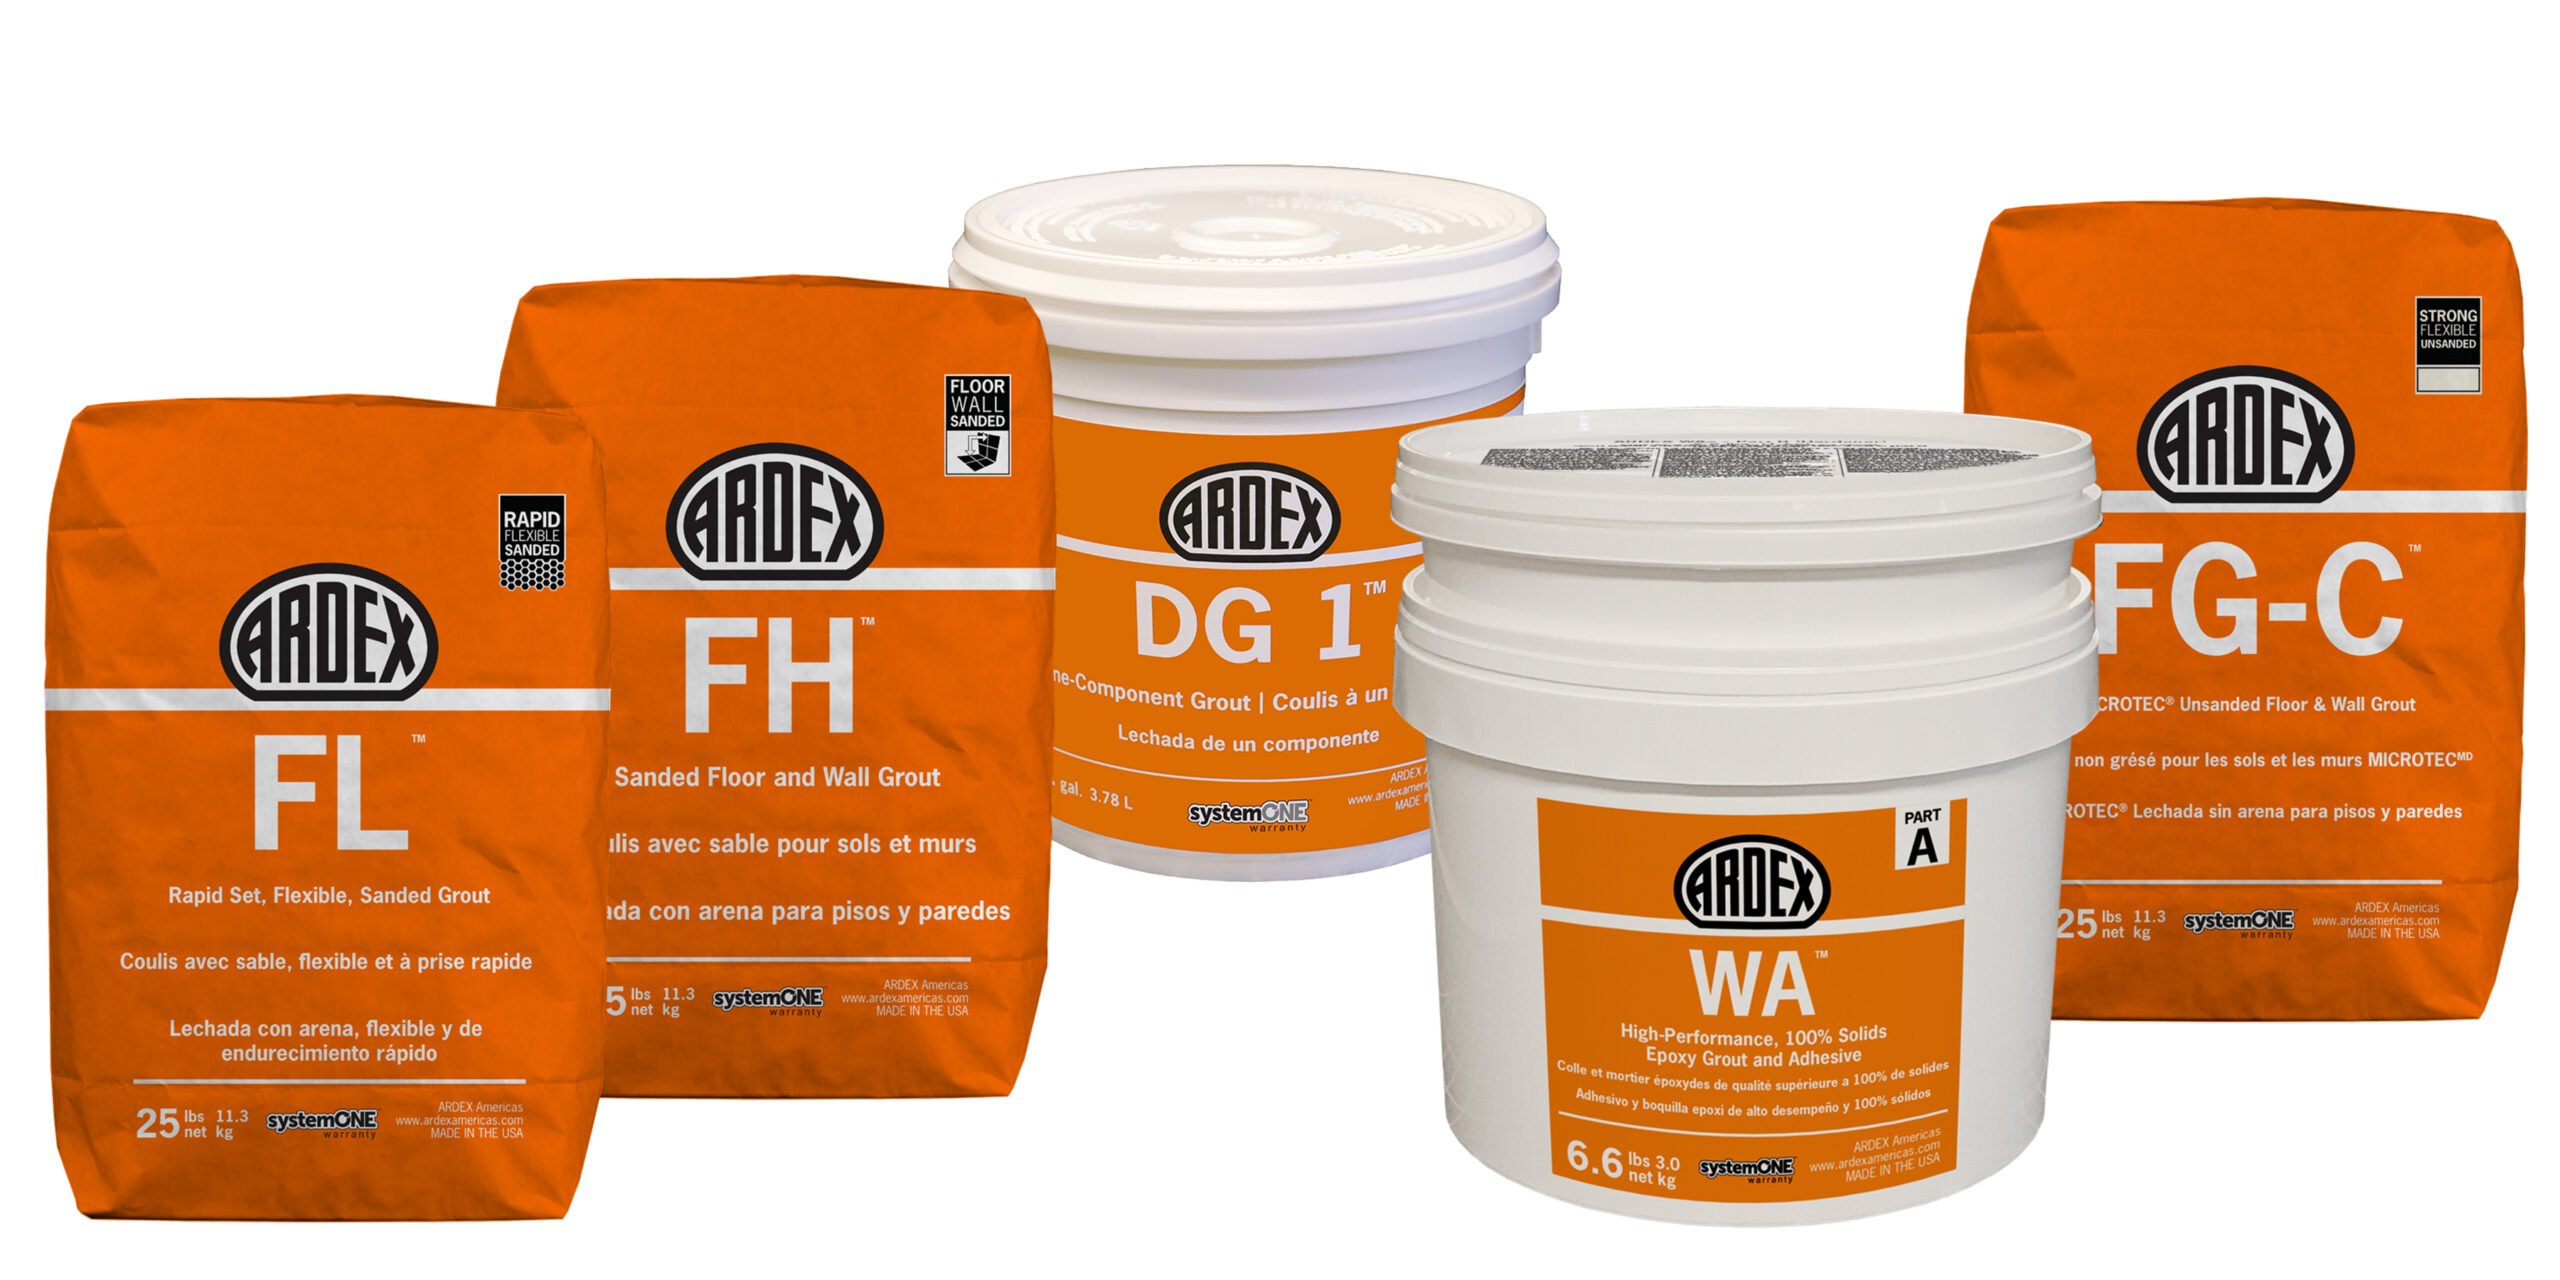 Ardex Products for grouting floor and wall tiles.